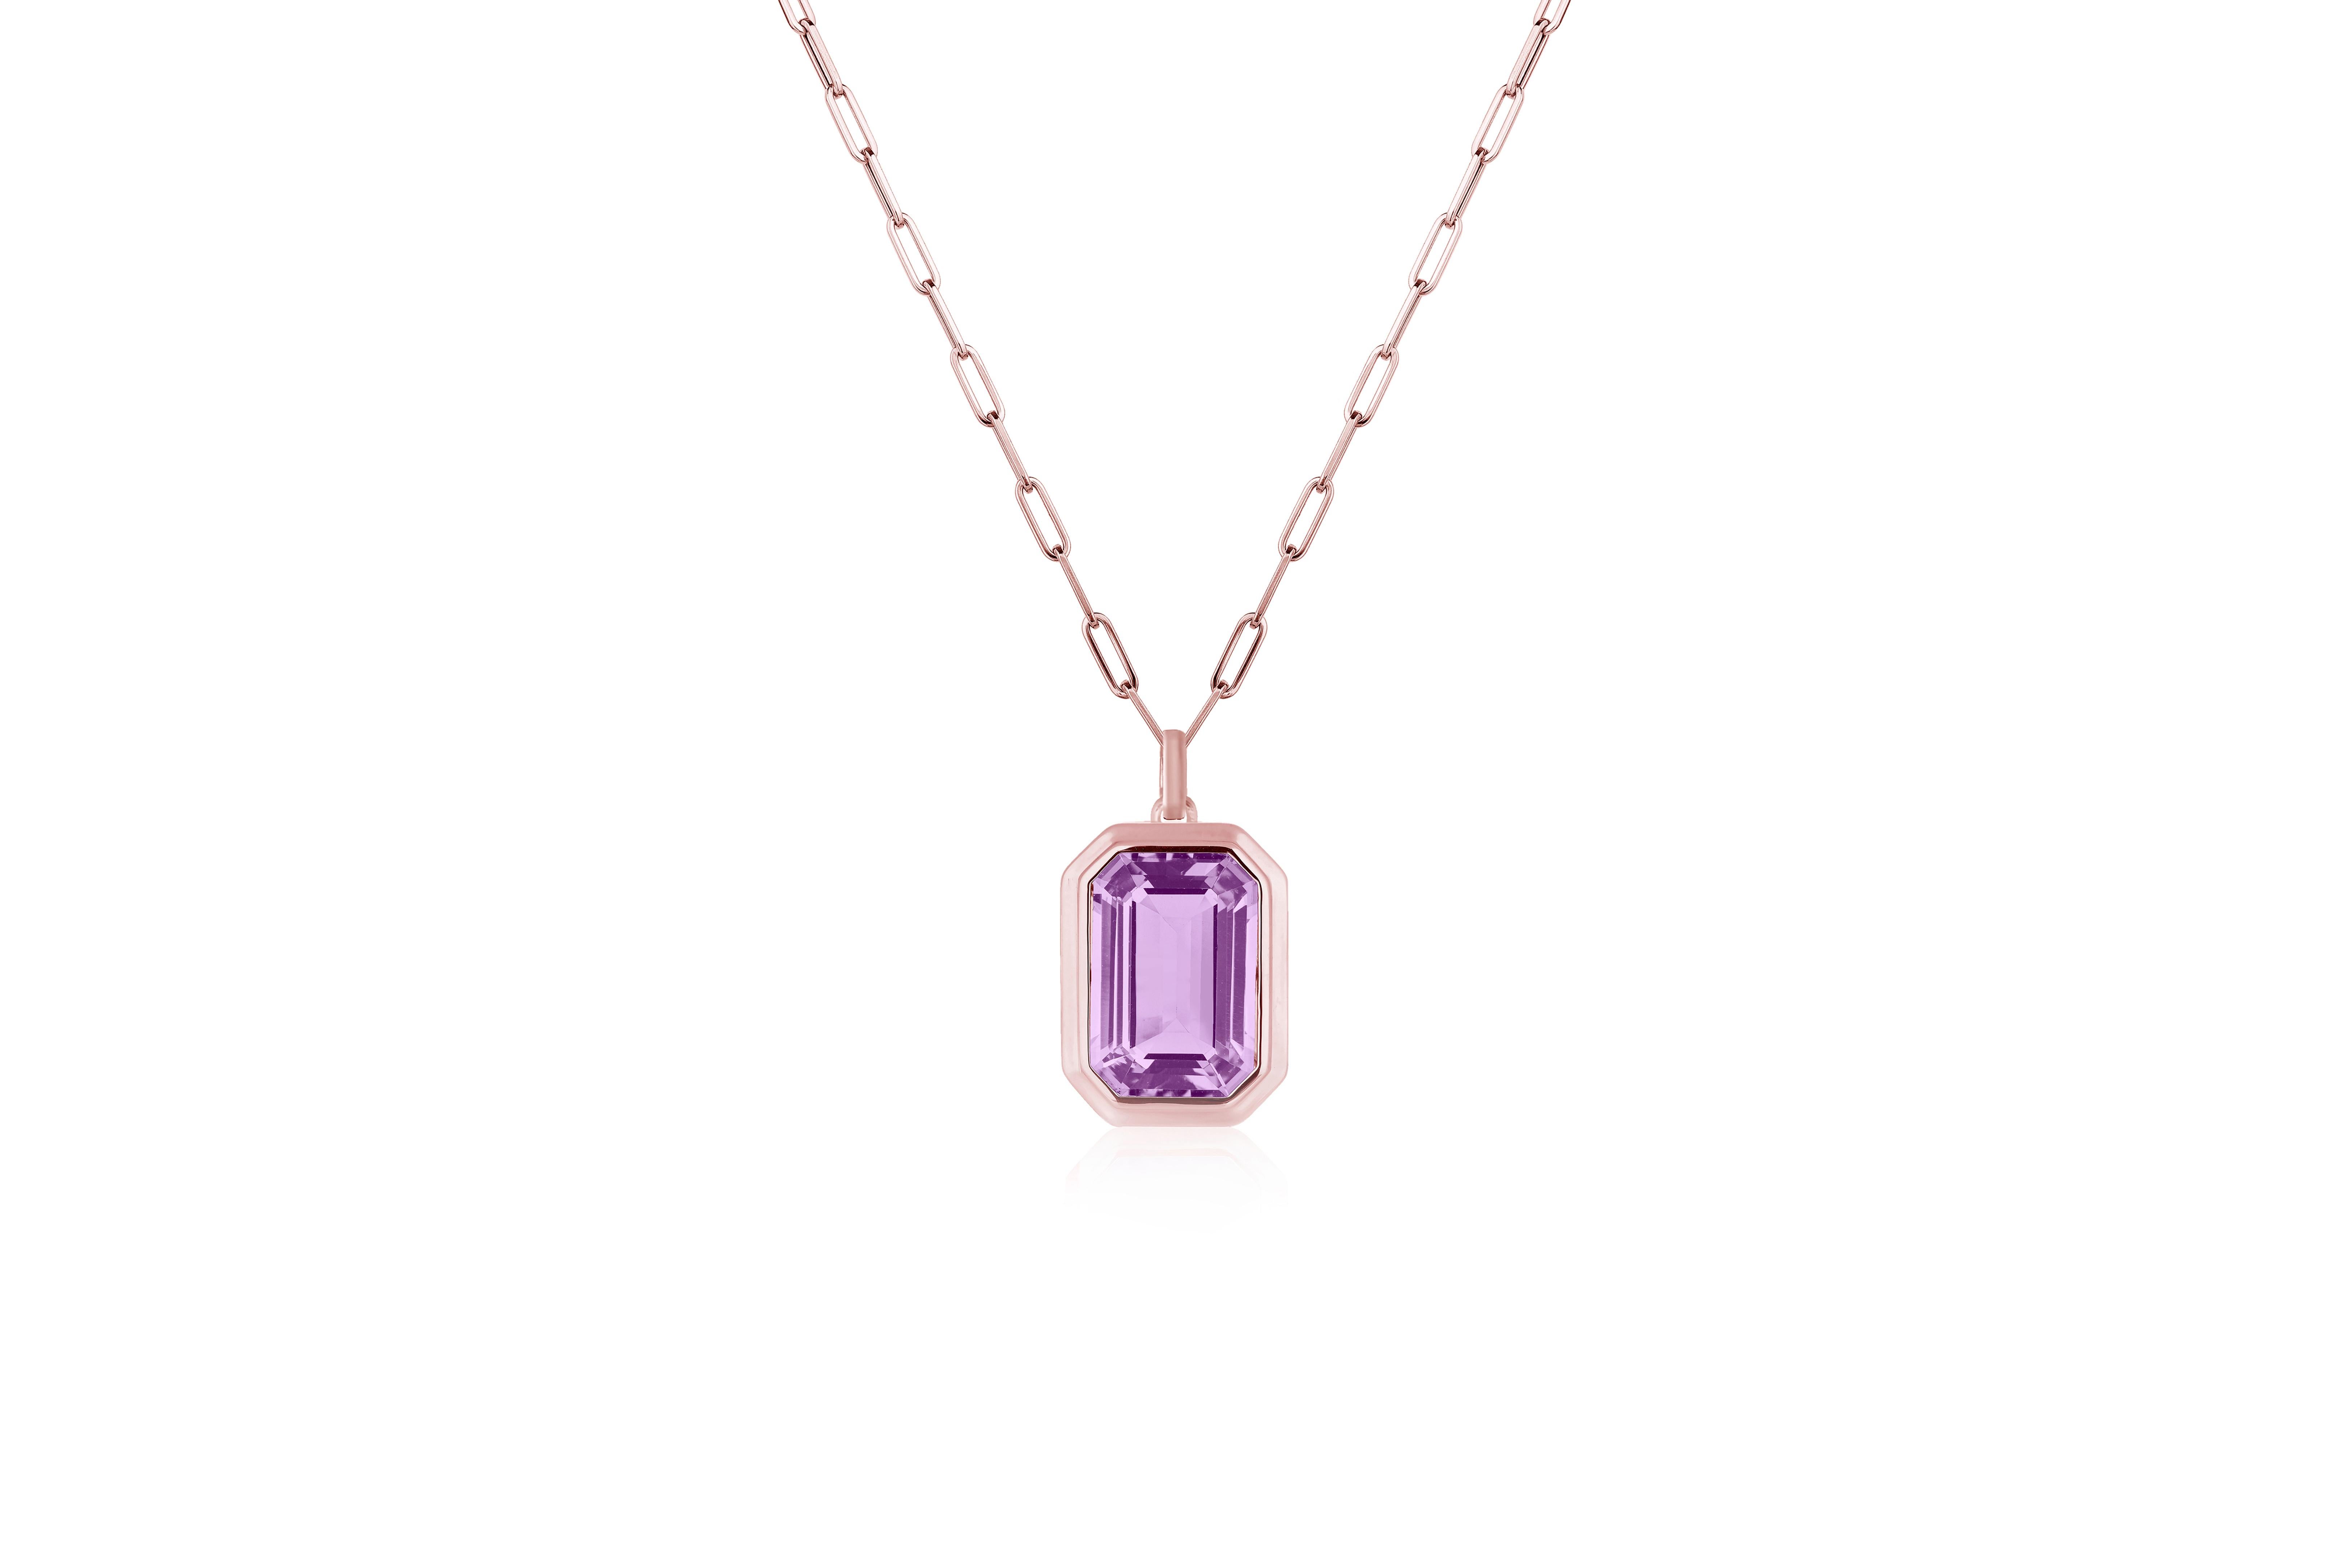 This beautiful Lavender Amethyst Emerald Cut Bezel Set Pendant in 18K Rose Gold is from our ‘Manhattan’ Collection. Minimalist lines yet bold structures are what our Manhattan Collection is all about. Our pieces represent the famous skyline and